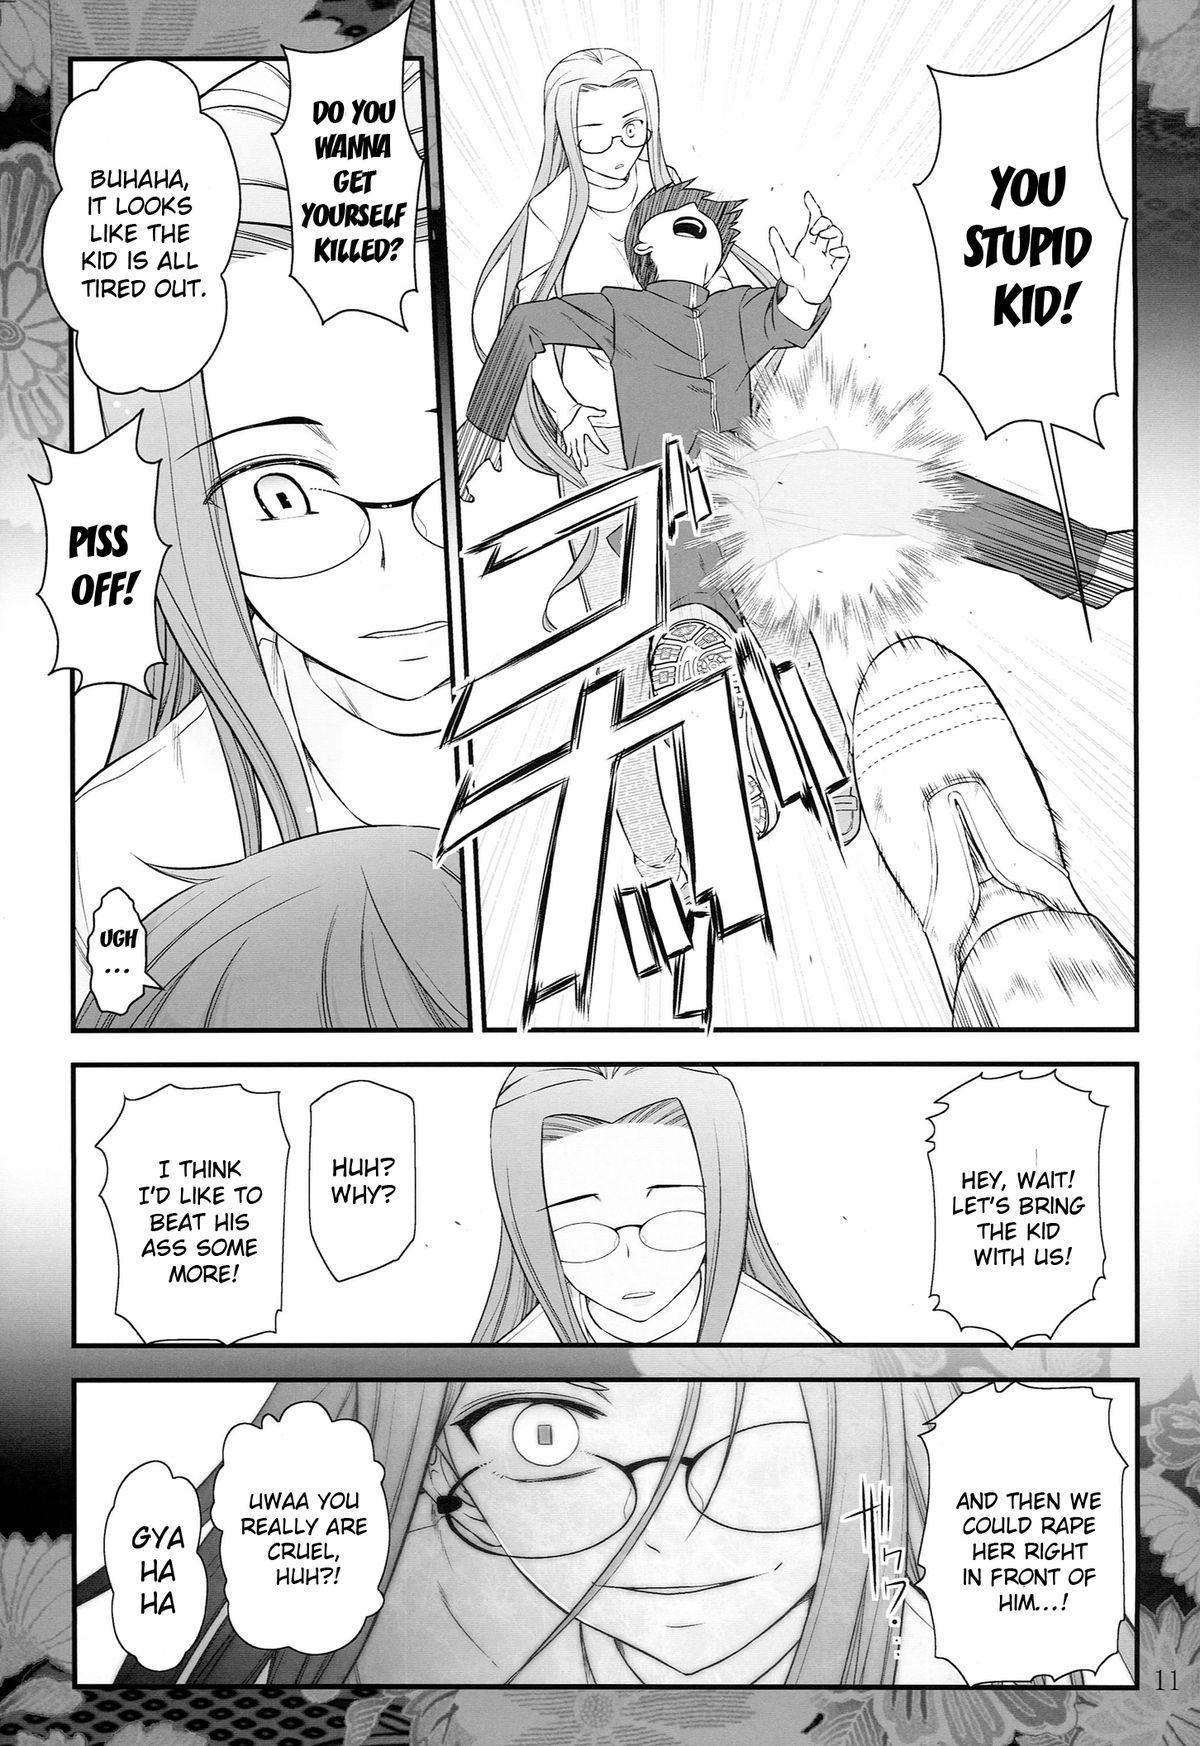 Colombian Fate/stay night Rider-san to Shounen no Nichijou | Fate/Stay Night Rider and Shounen's Daily Affection - Fate stay night Strange - Page 12